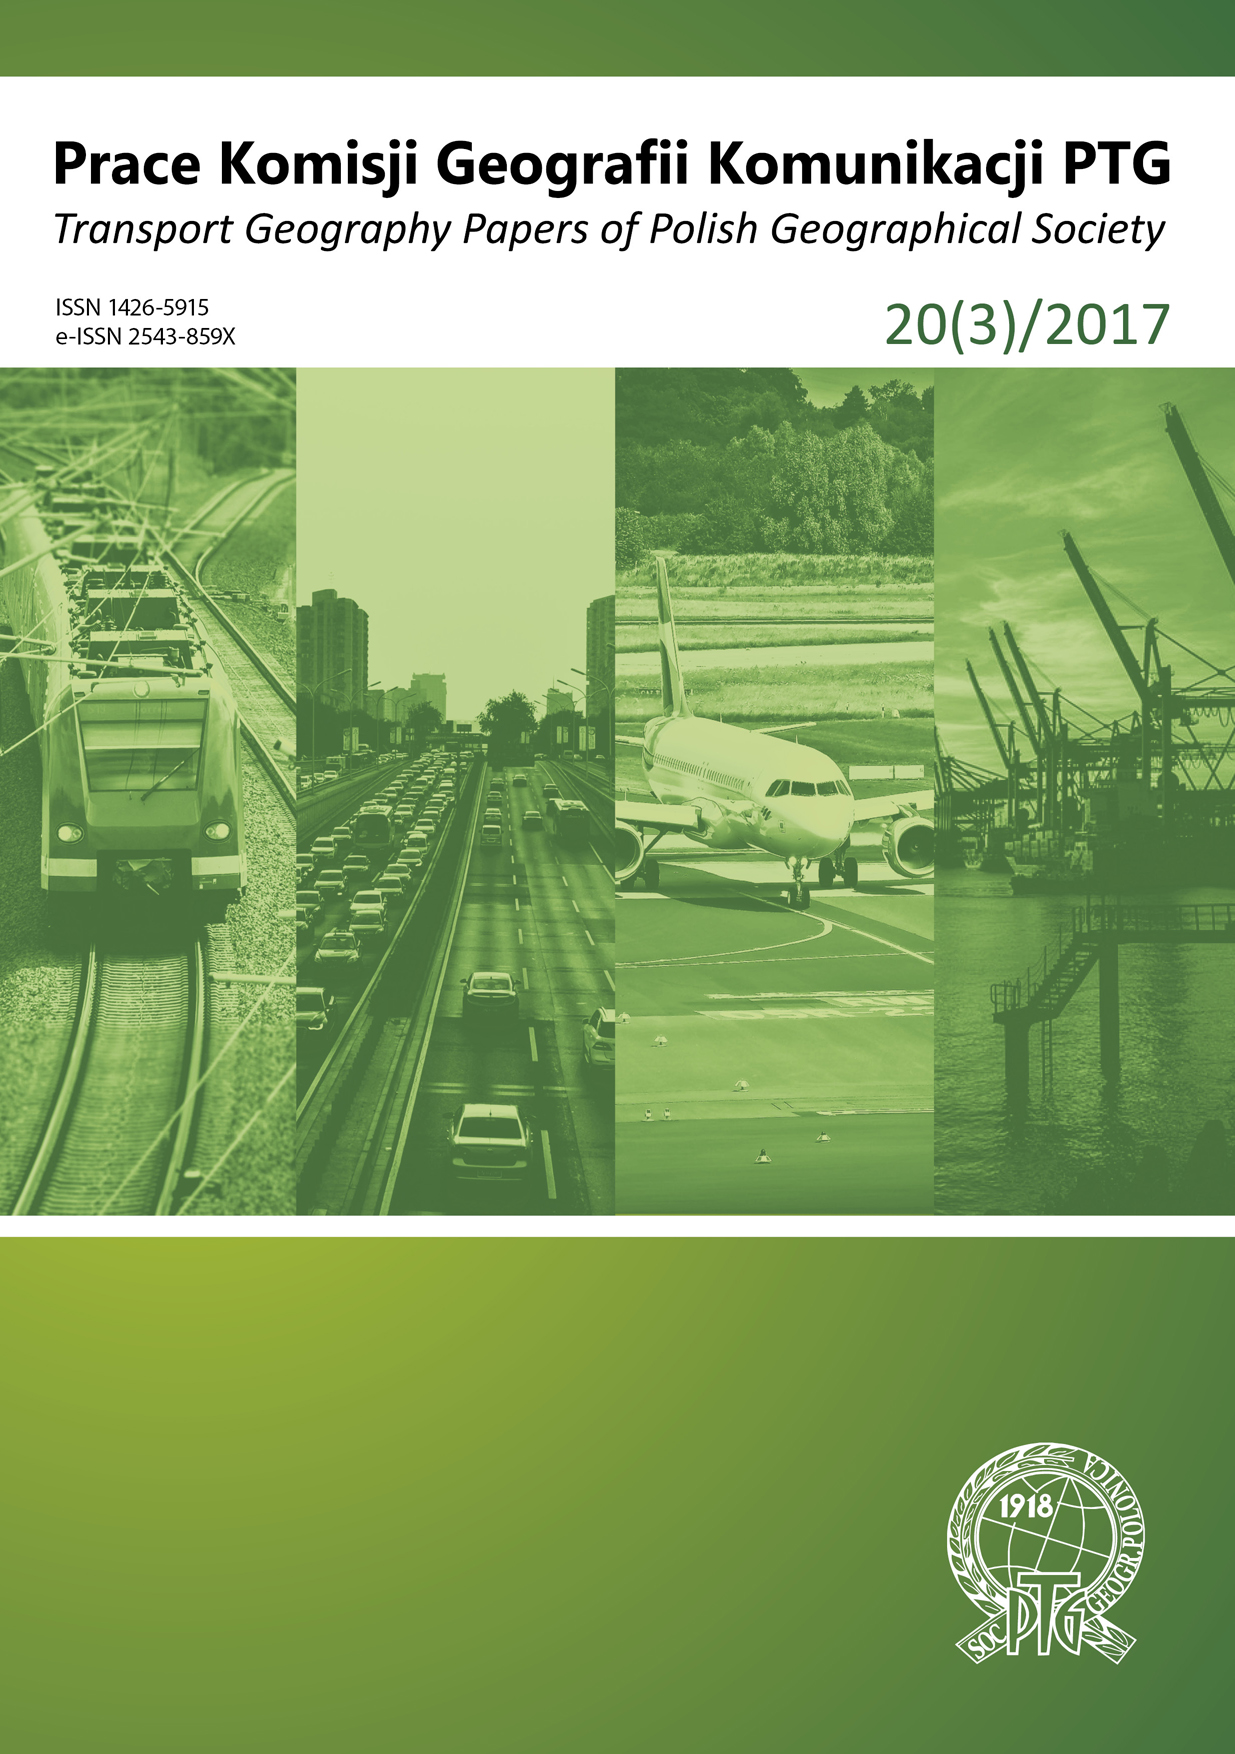 Perspectives of using railway in communication services of northern districts of Gdynia Cover Image